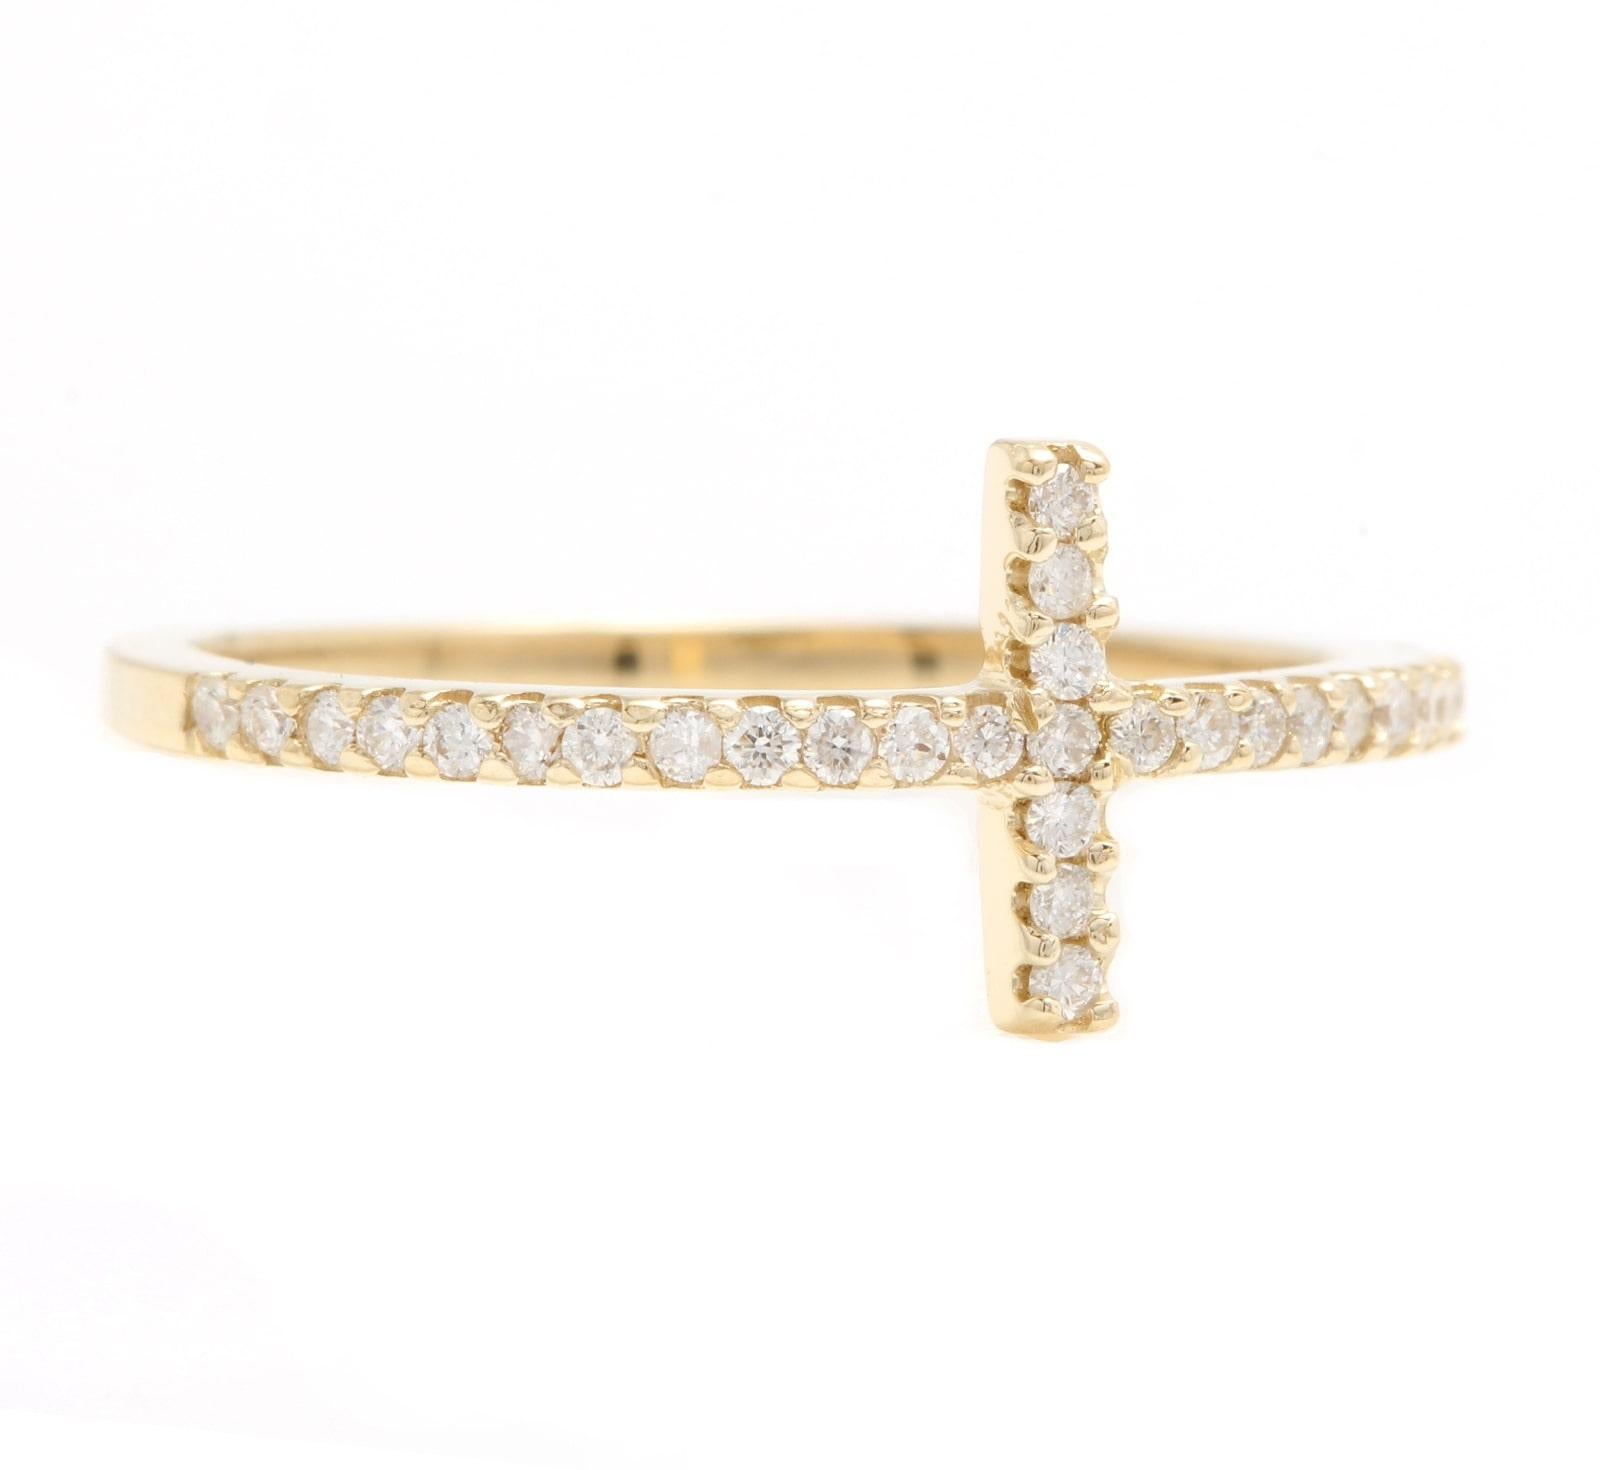 Fine 0.25 Carats Natural Diamond 14K Solid Yellow Gold Cross Ring

Suggested Replacement Value: Approx. $1,400.00

Stamped: 14K

Total Natural Round Cut Diamonds Weight: Approx. 0.25 Carats (color G-H / Clarity SI1-SI2)

The width of the cross band